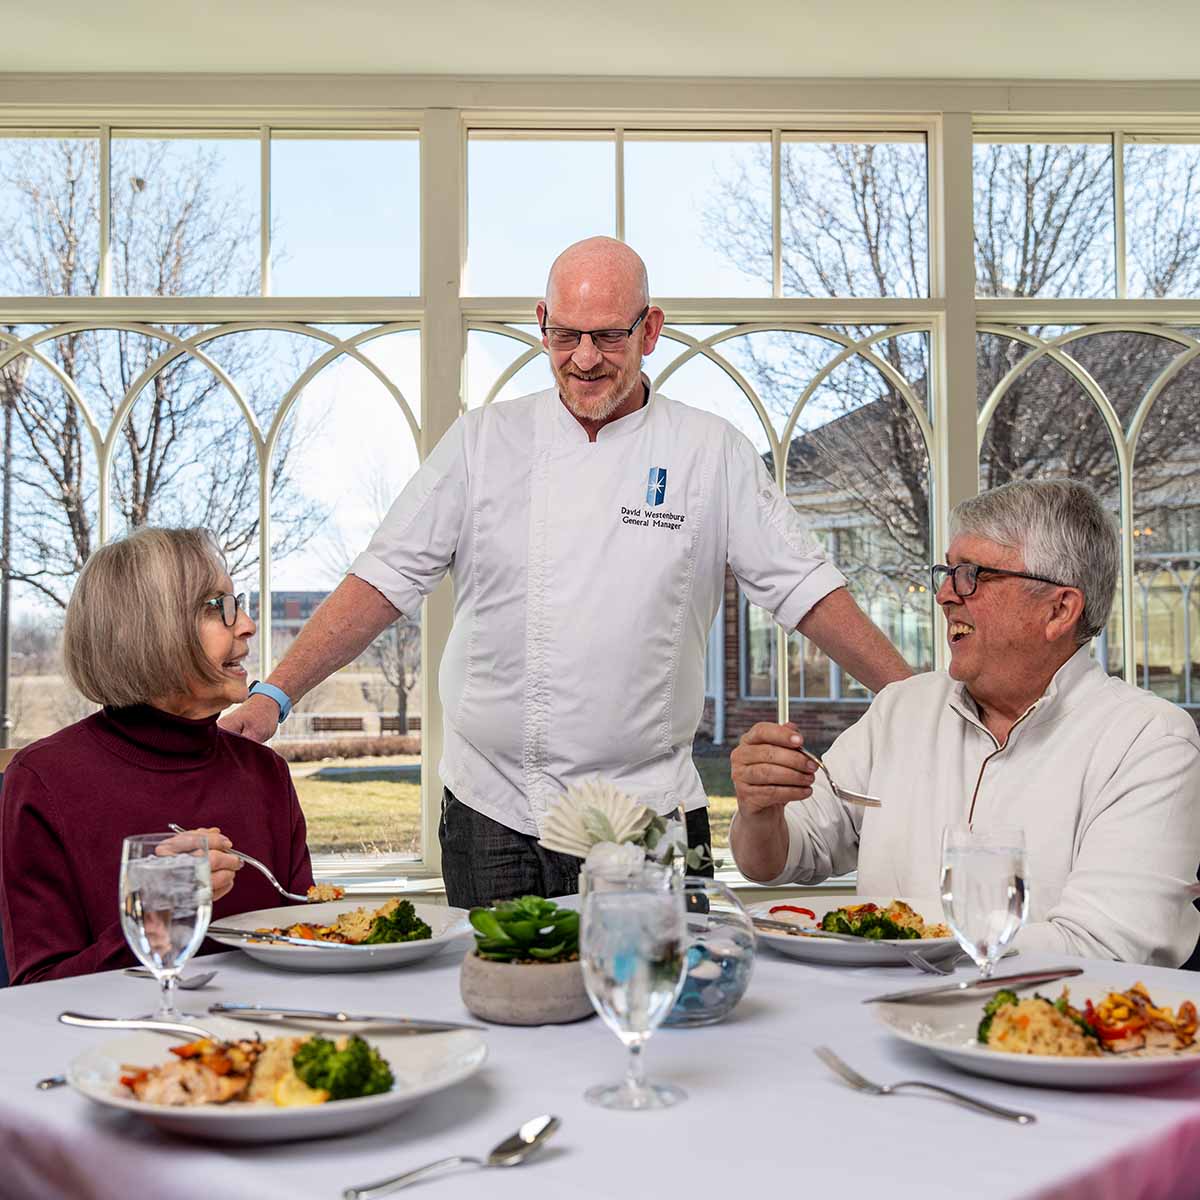 An Immanuel chef speaks with residents during dinner service.